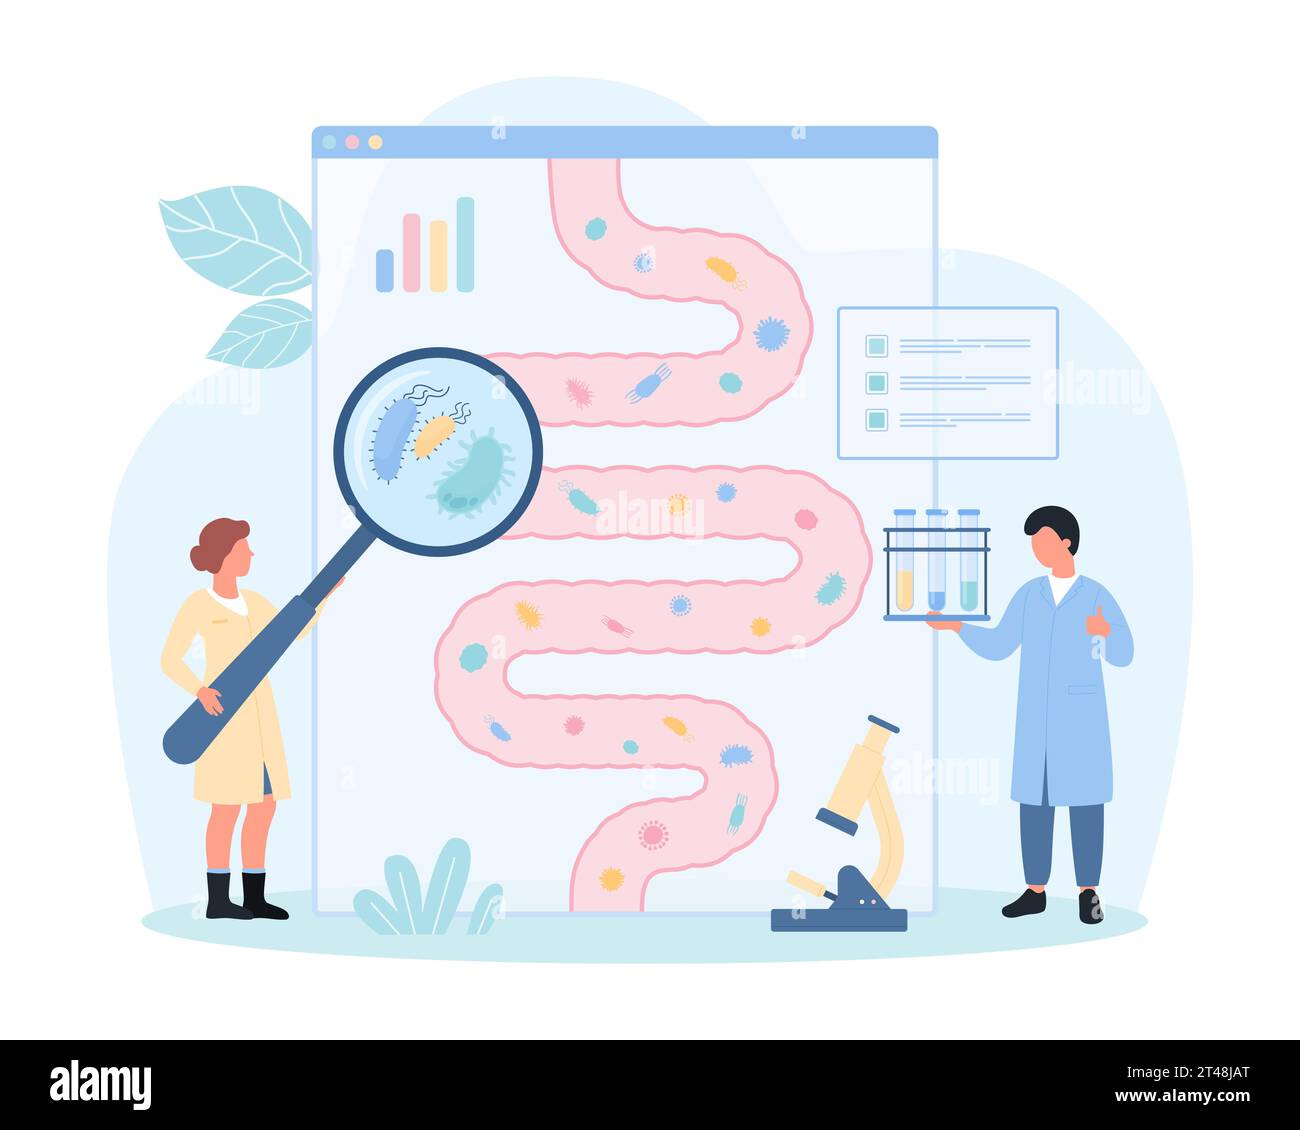 Healthy gut microbiome vector illustration. Cartoon tiny people with magnifying glass check lactobacilli, good microbiota inside human intestine on gastrointestinal tract anatomy infographic diagram Stock Vector